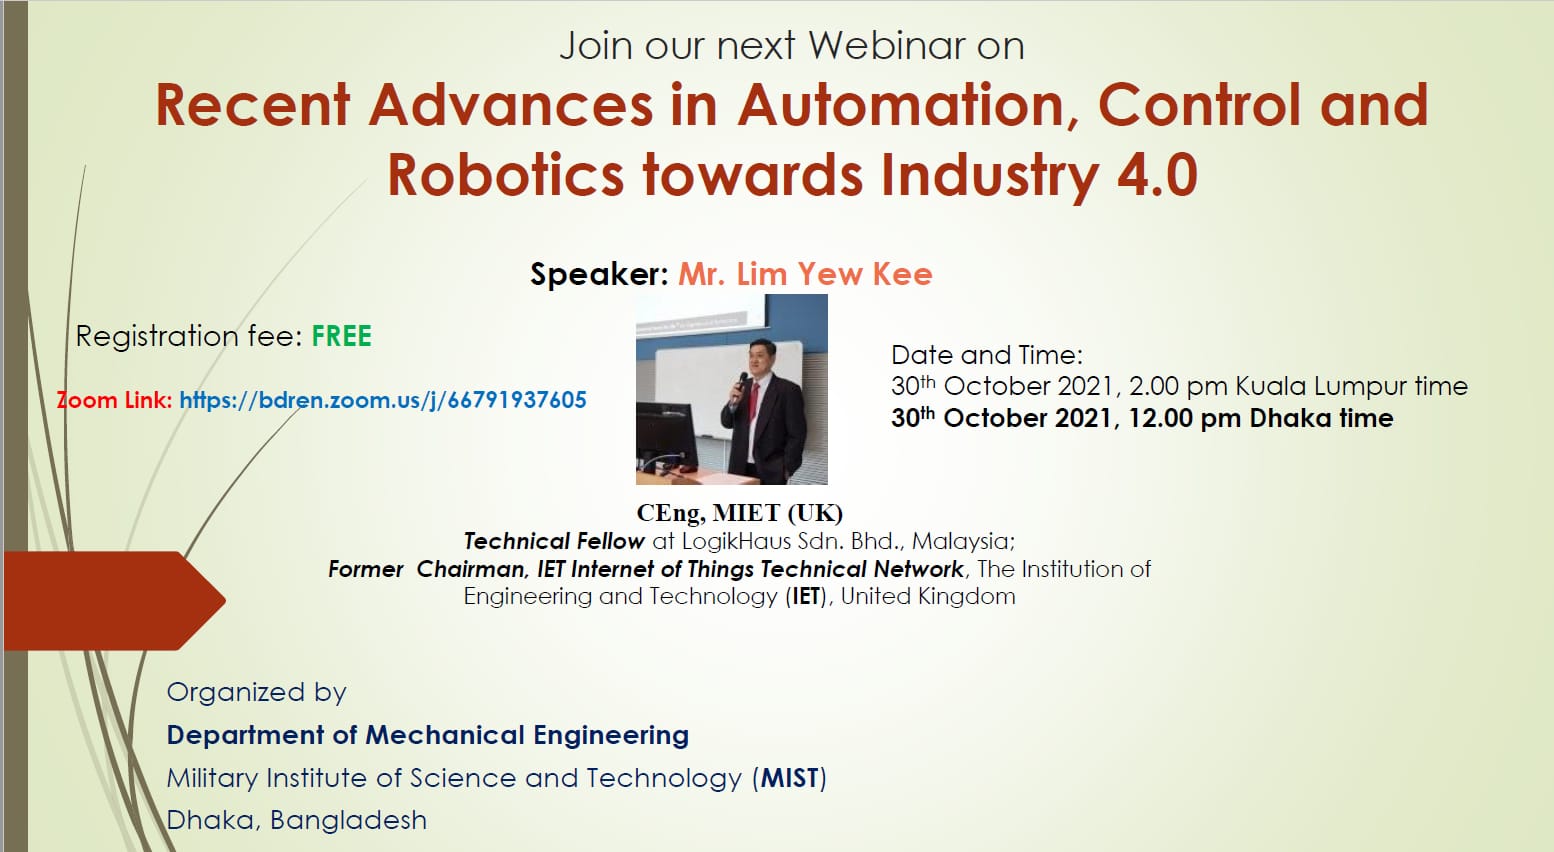 Webinar on Recent Advances in Automation, Control and Robotics towards Industry 4.0